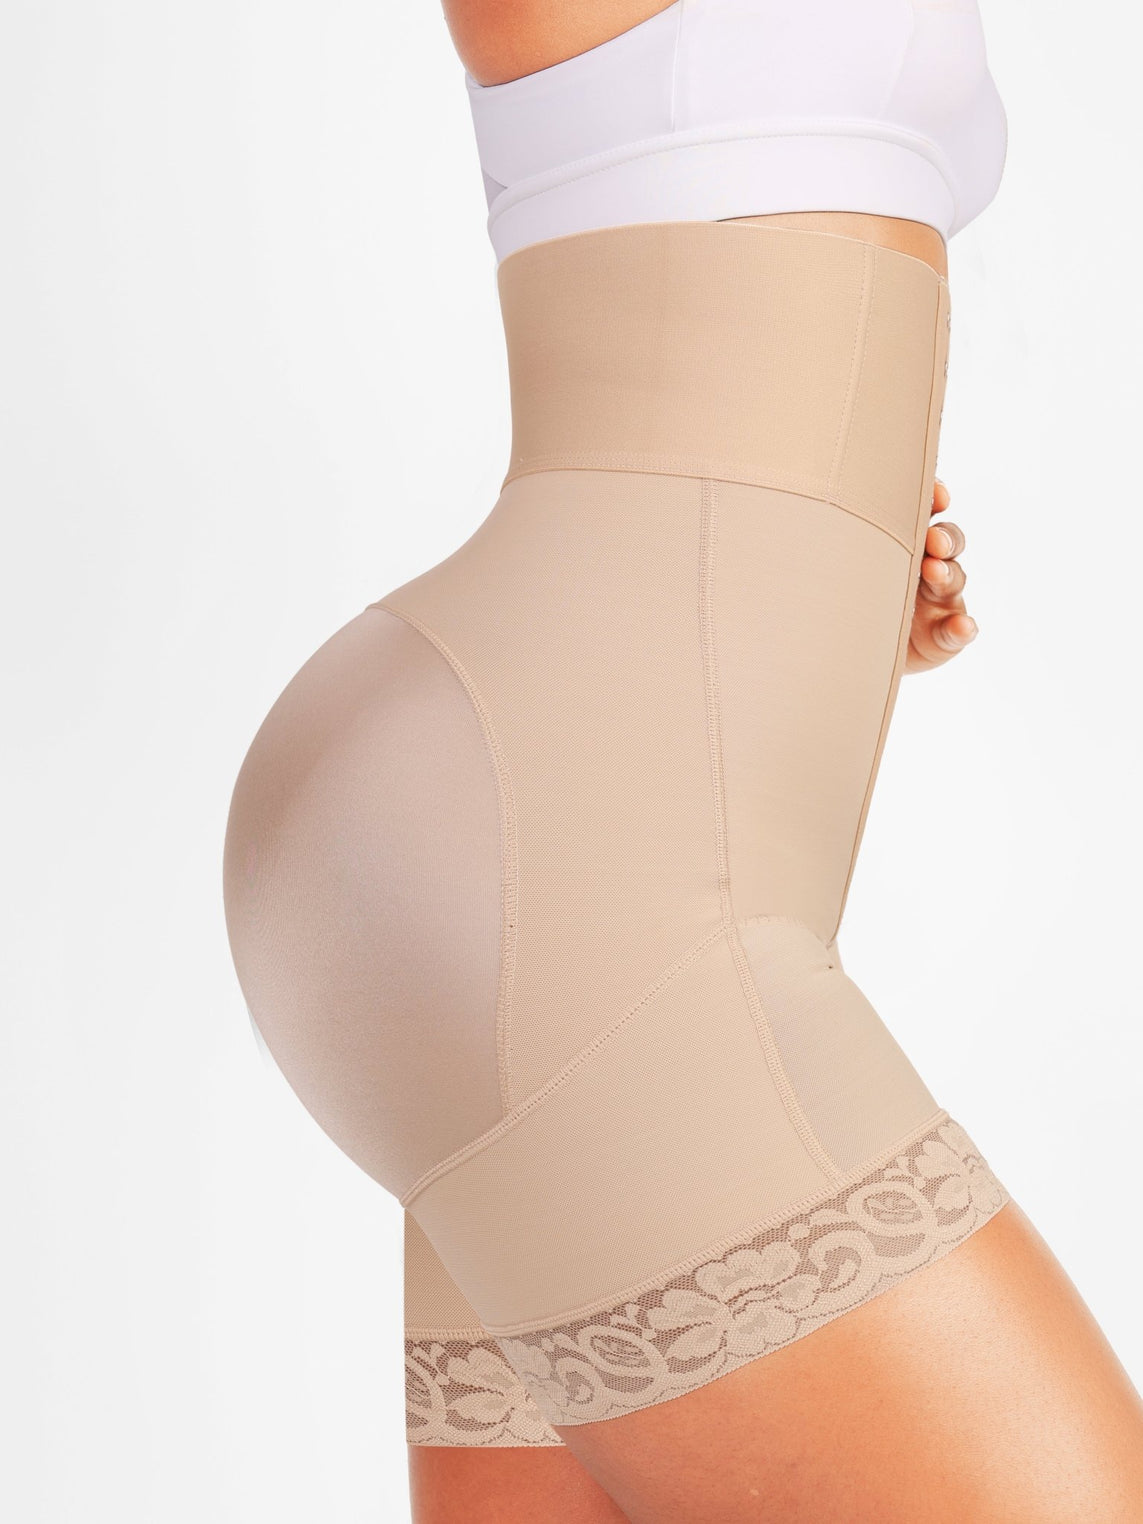 Valentina shapewear with boning and hook closure by Bella Fit